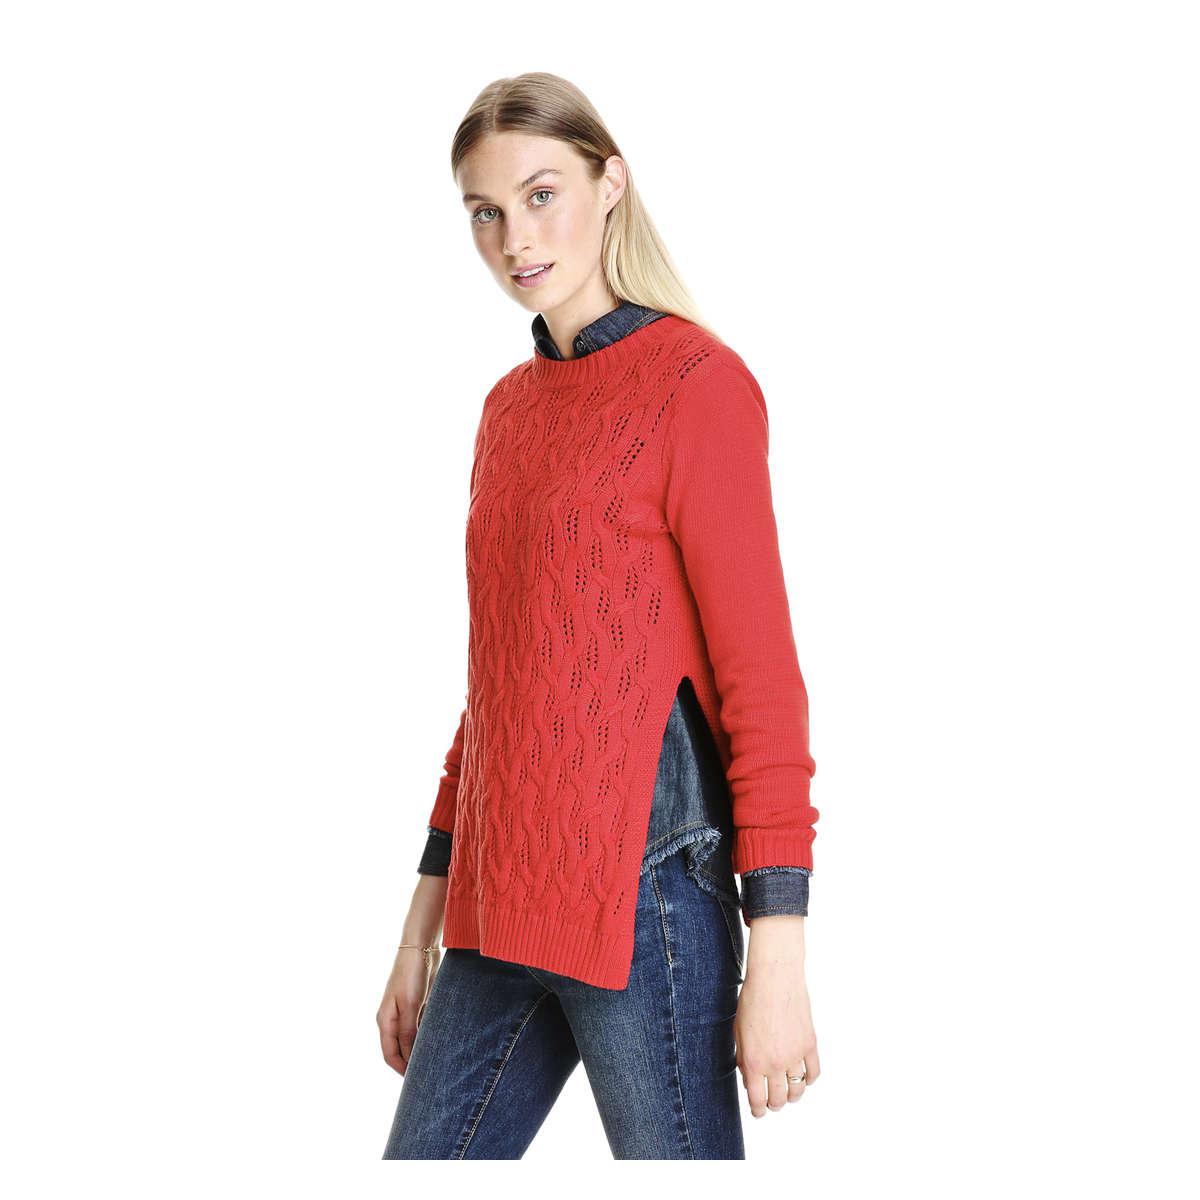 Lyst - Joe Fresh Cable Knit Sweater in Red